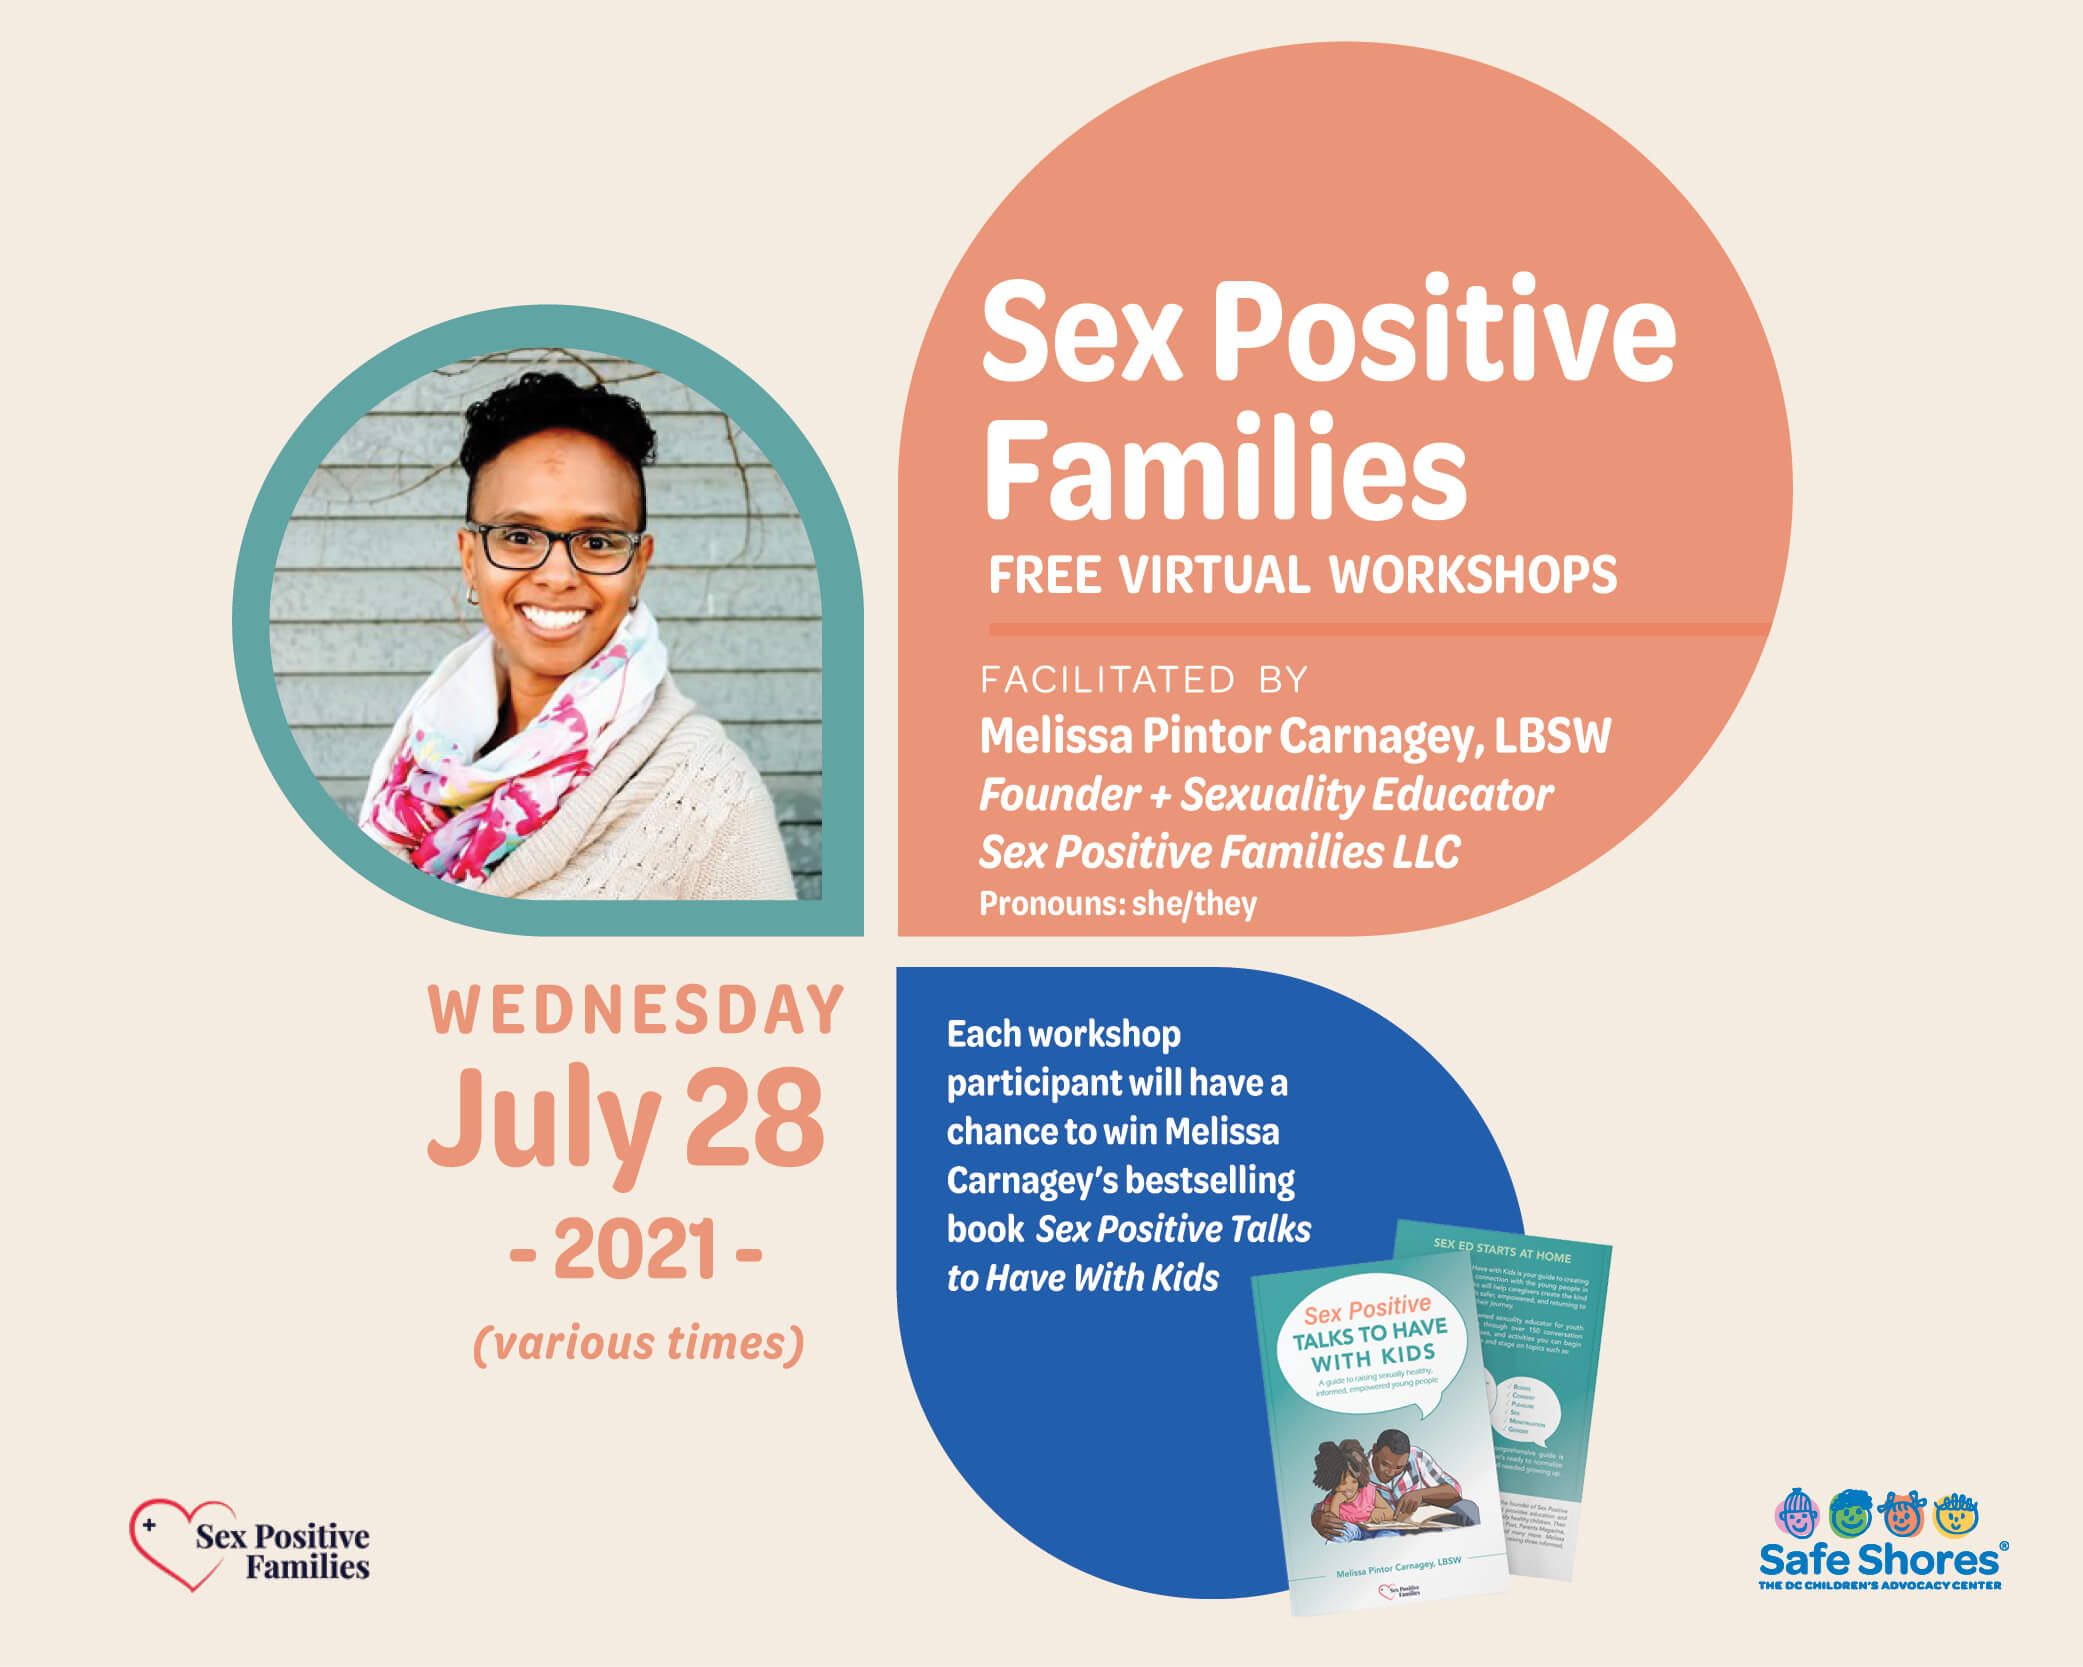 Sex Positive Families Workshop Series (FREE) on July 28th Safe Shores pic image